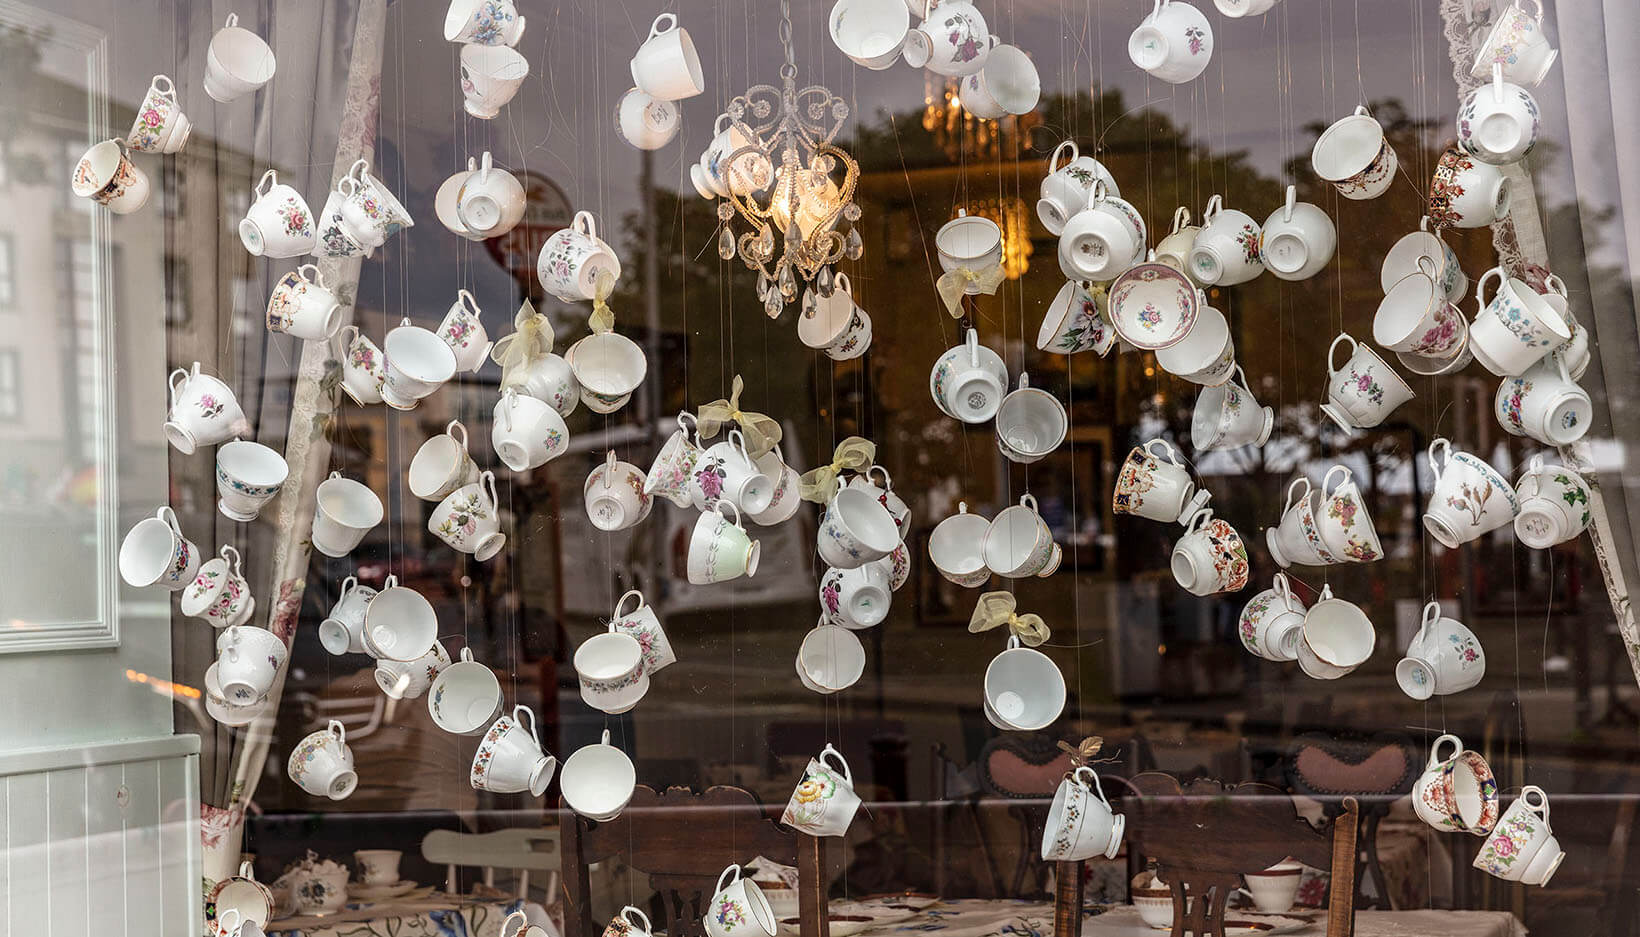 cups hanging in the window